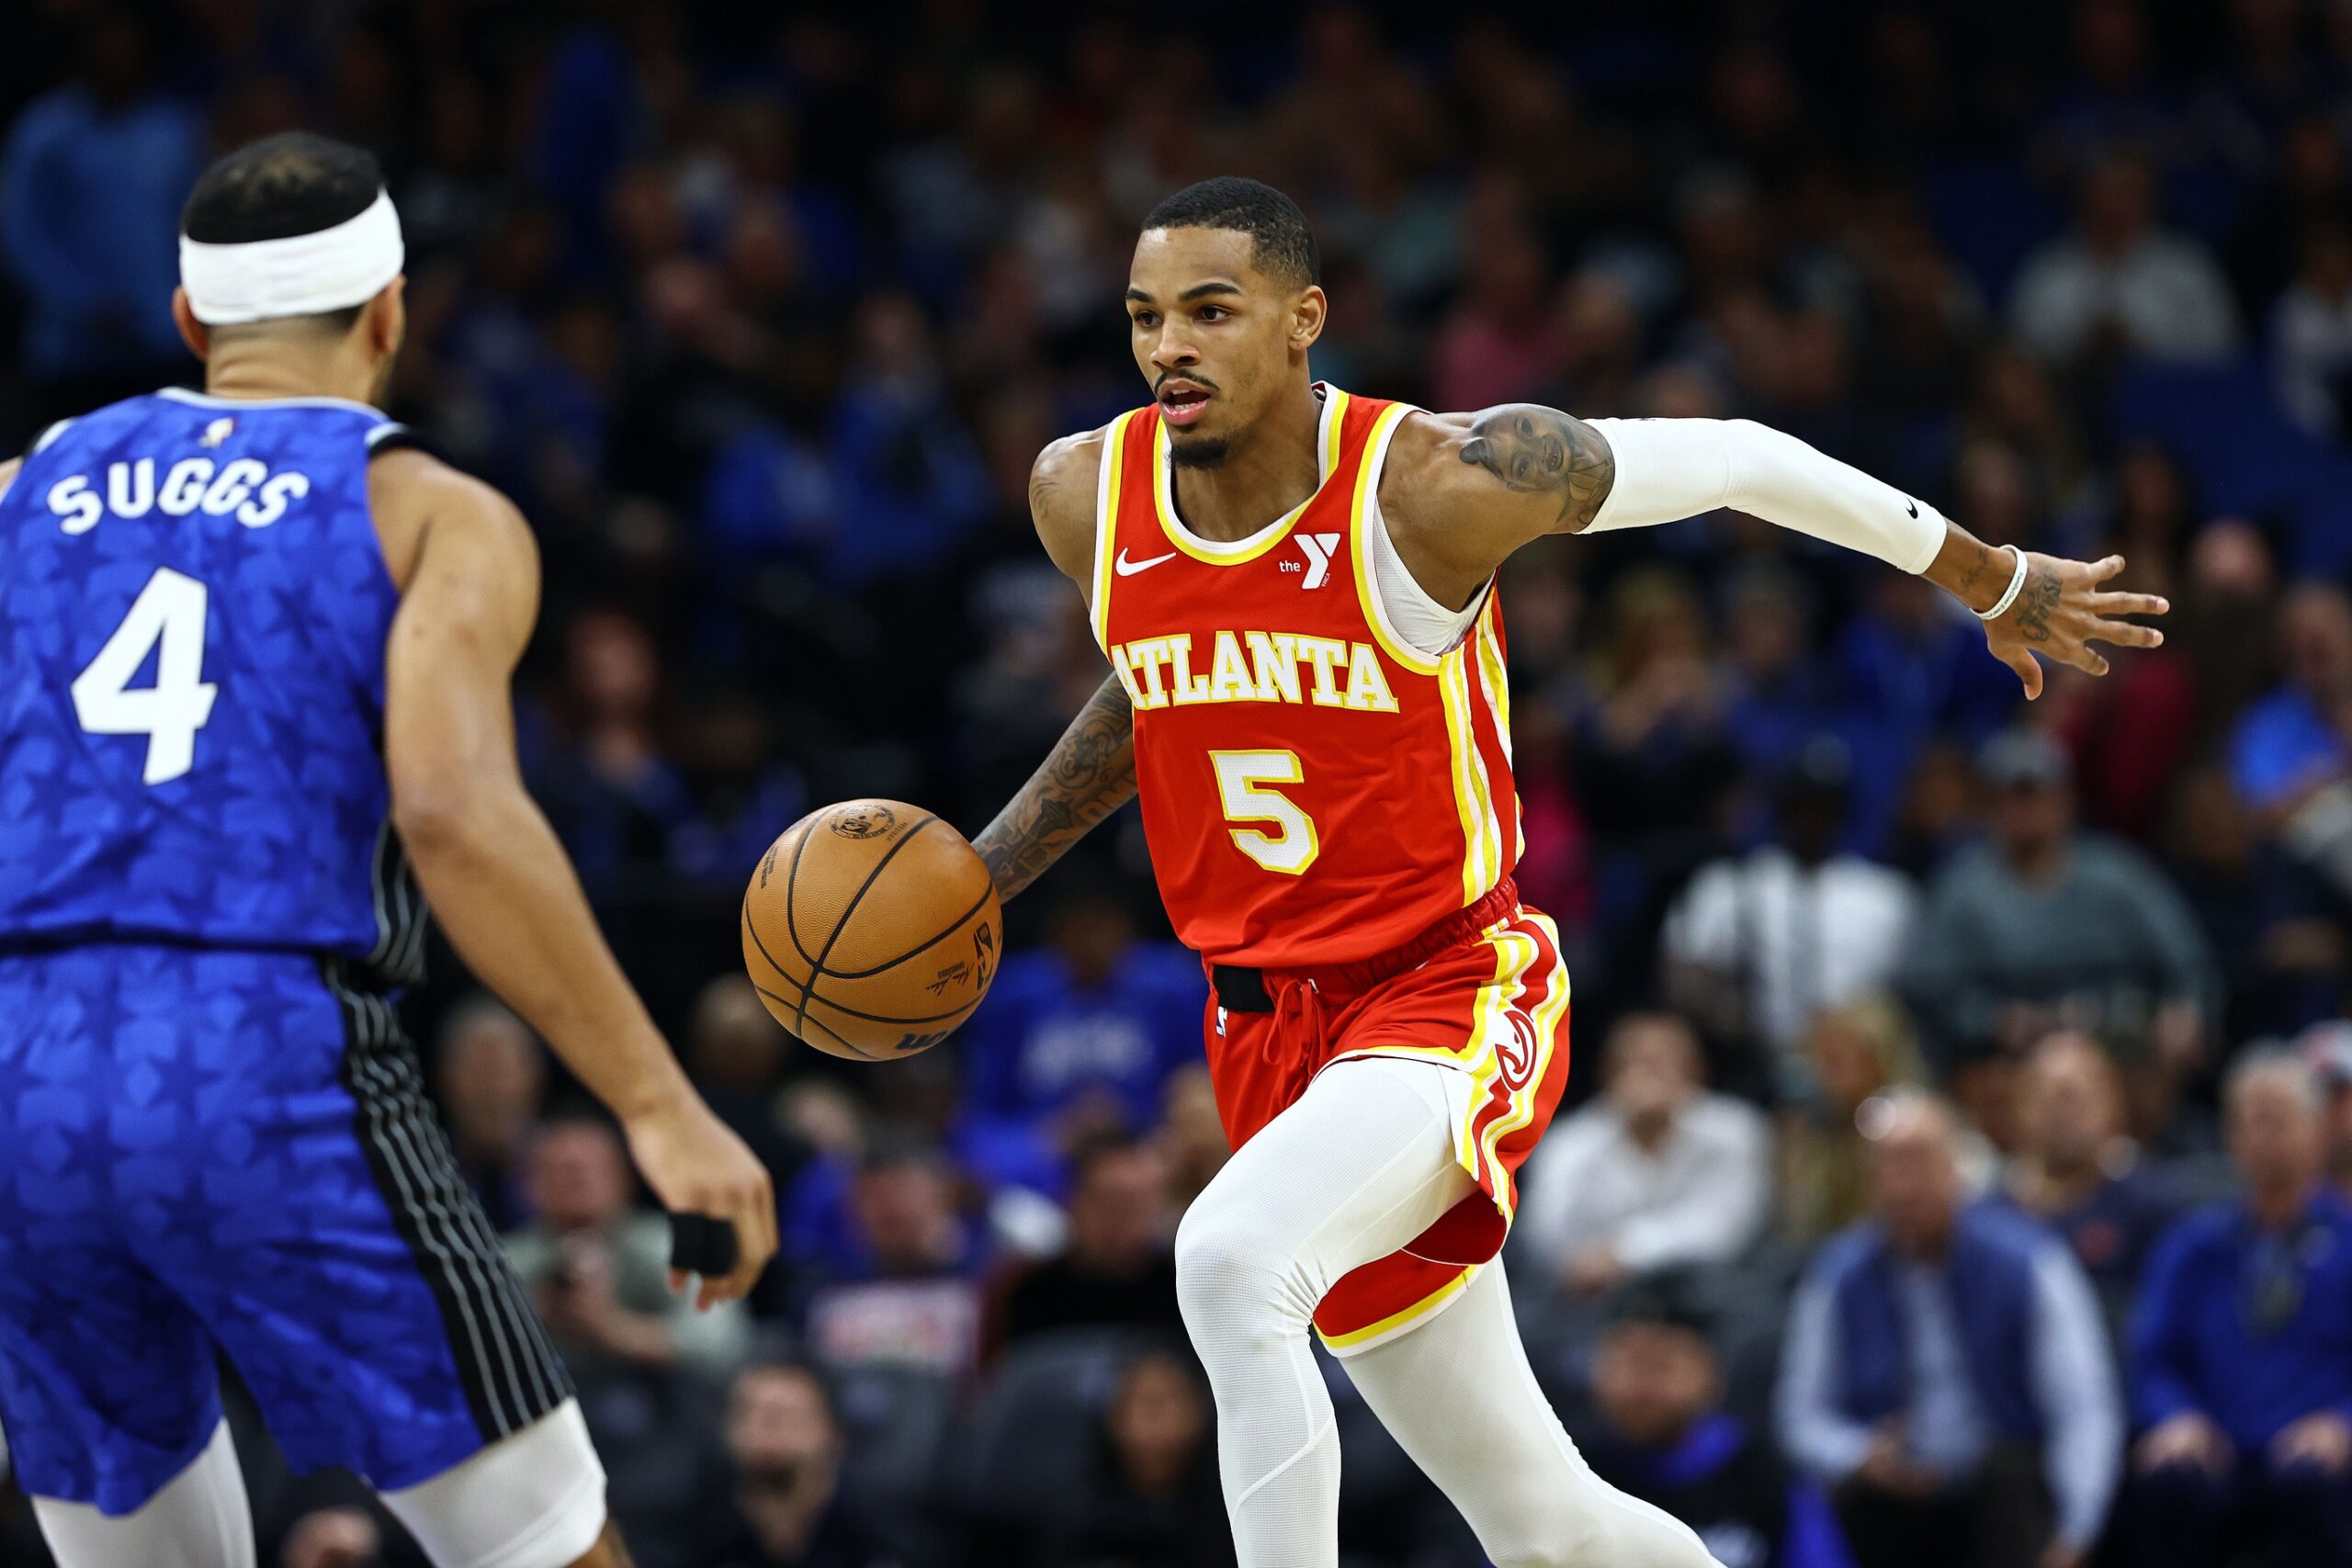 3 Ways Dejounte Murray Can Take the Hawks to the Next Level